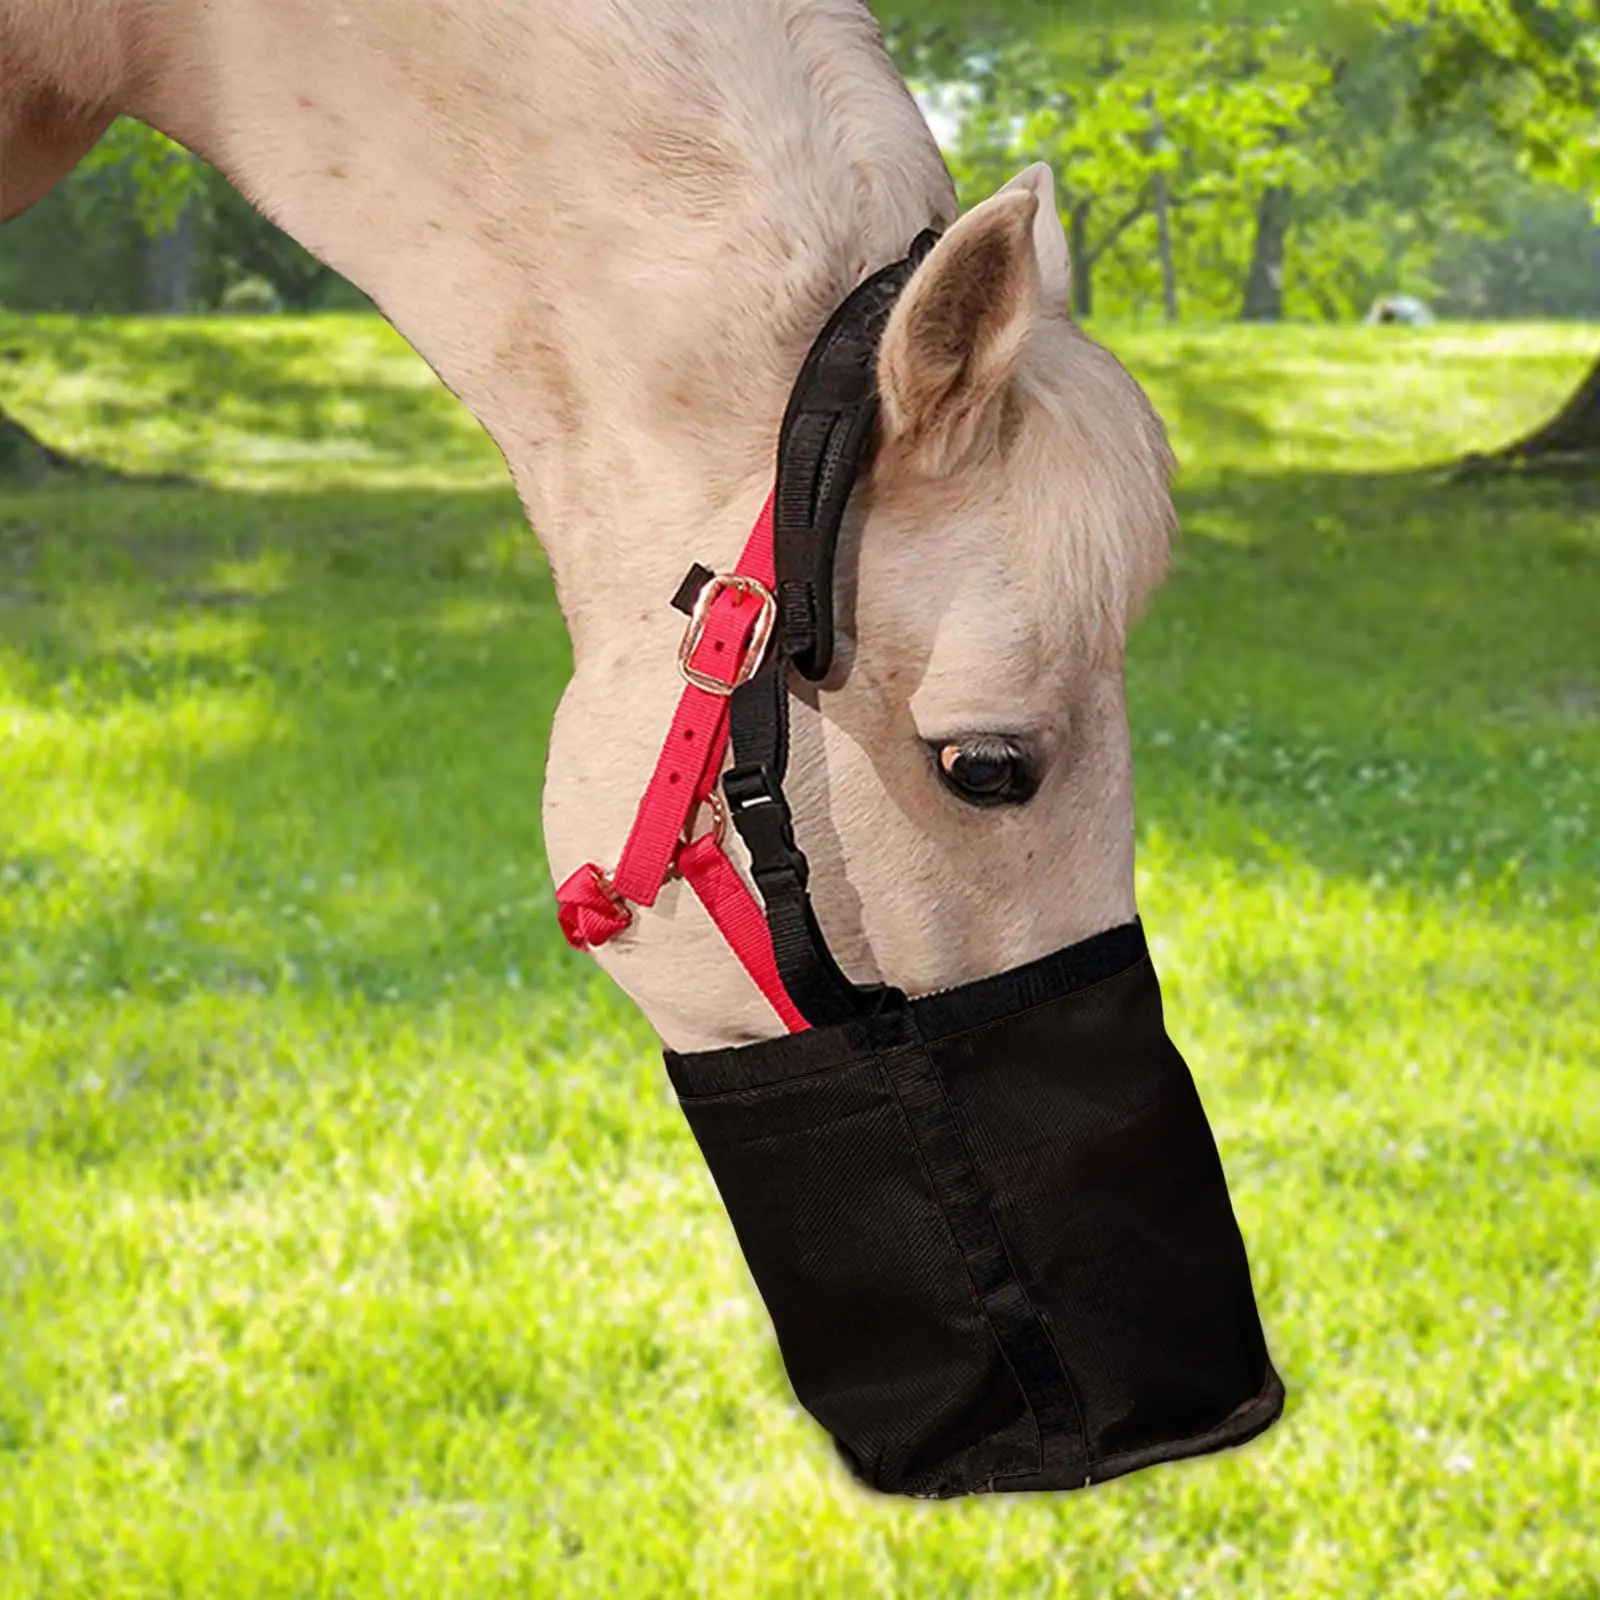 Horse Hay Bag Holder Slow Feeder Container Large Capacity Feeder Bag for Sheep Livestock